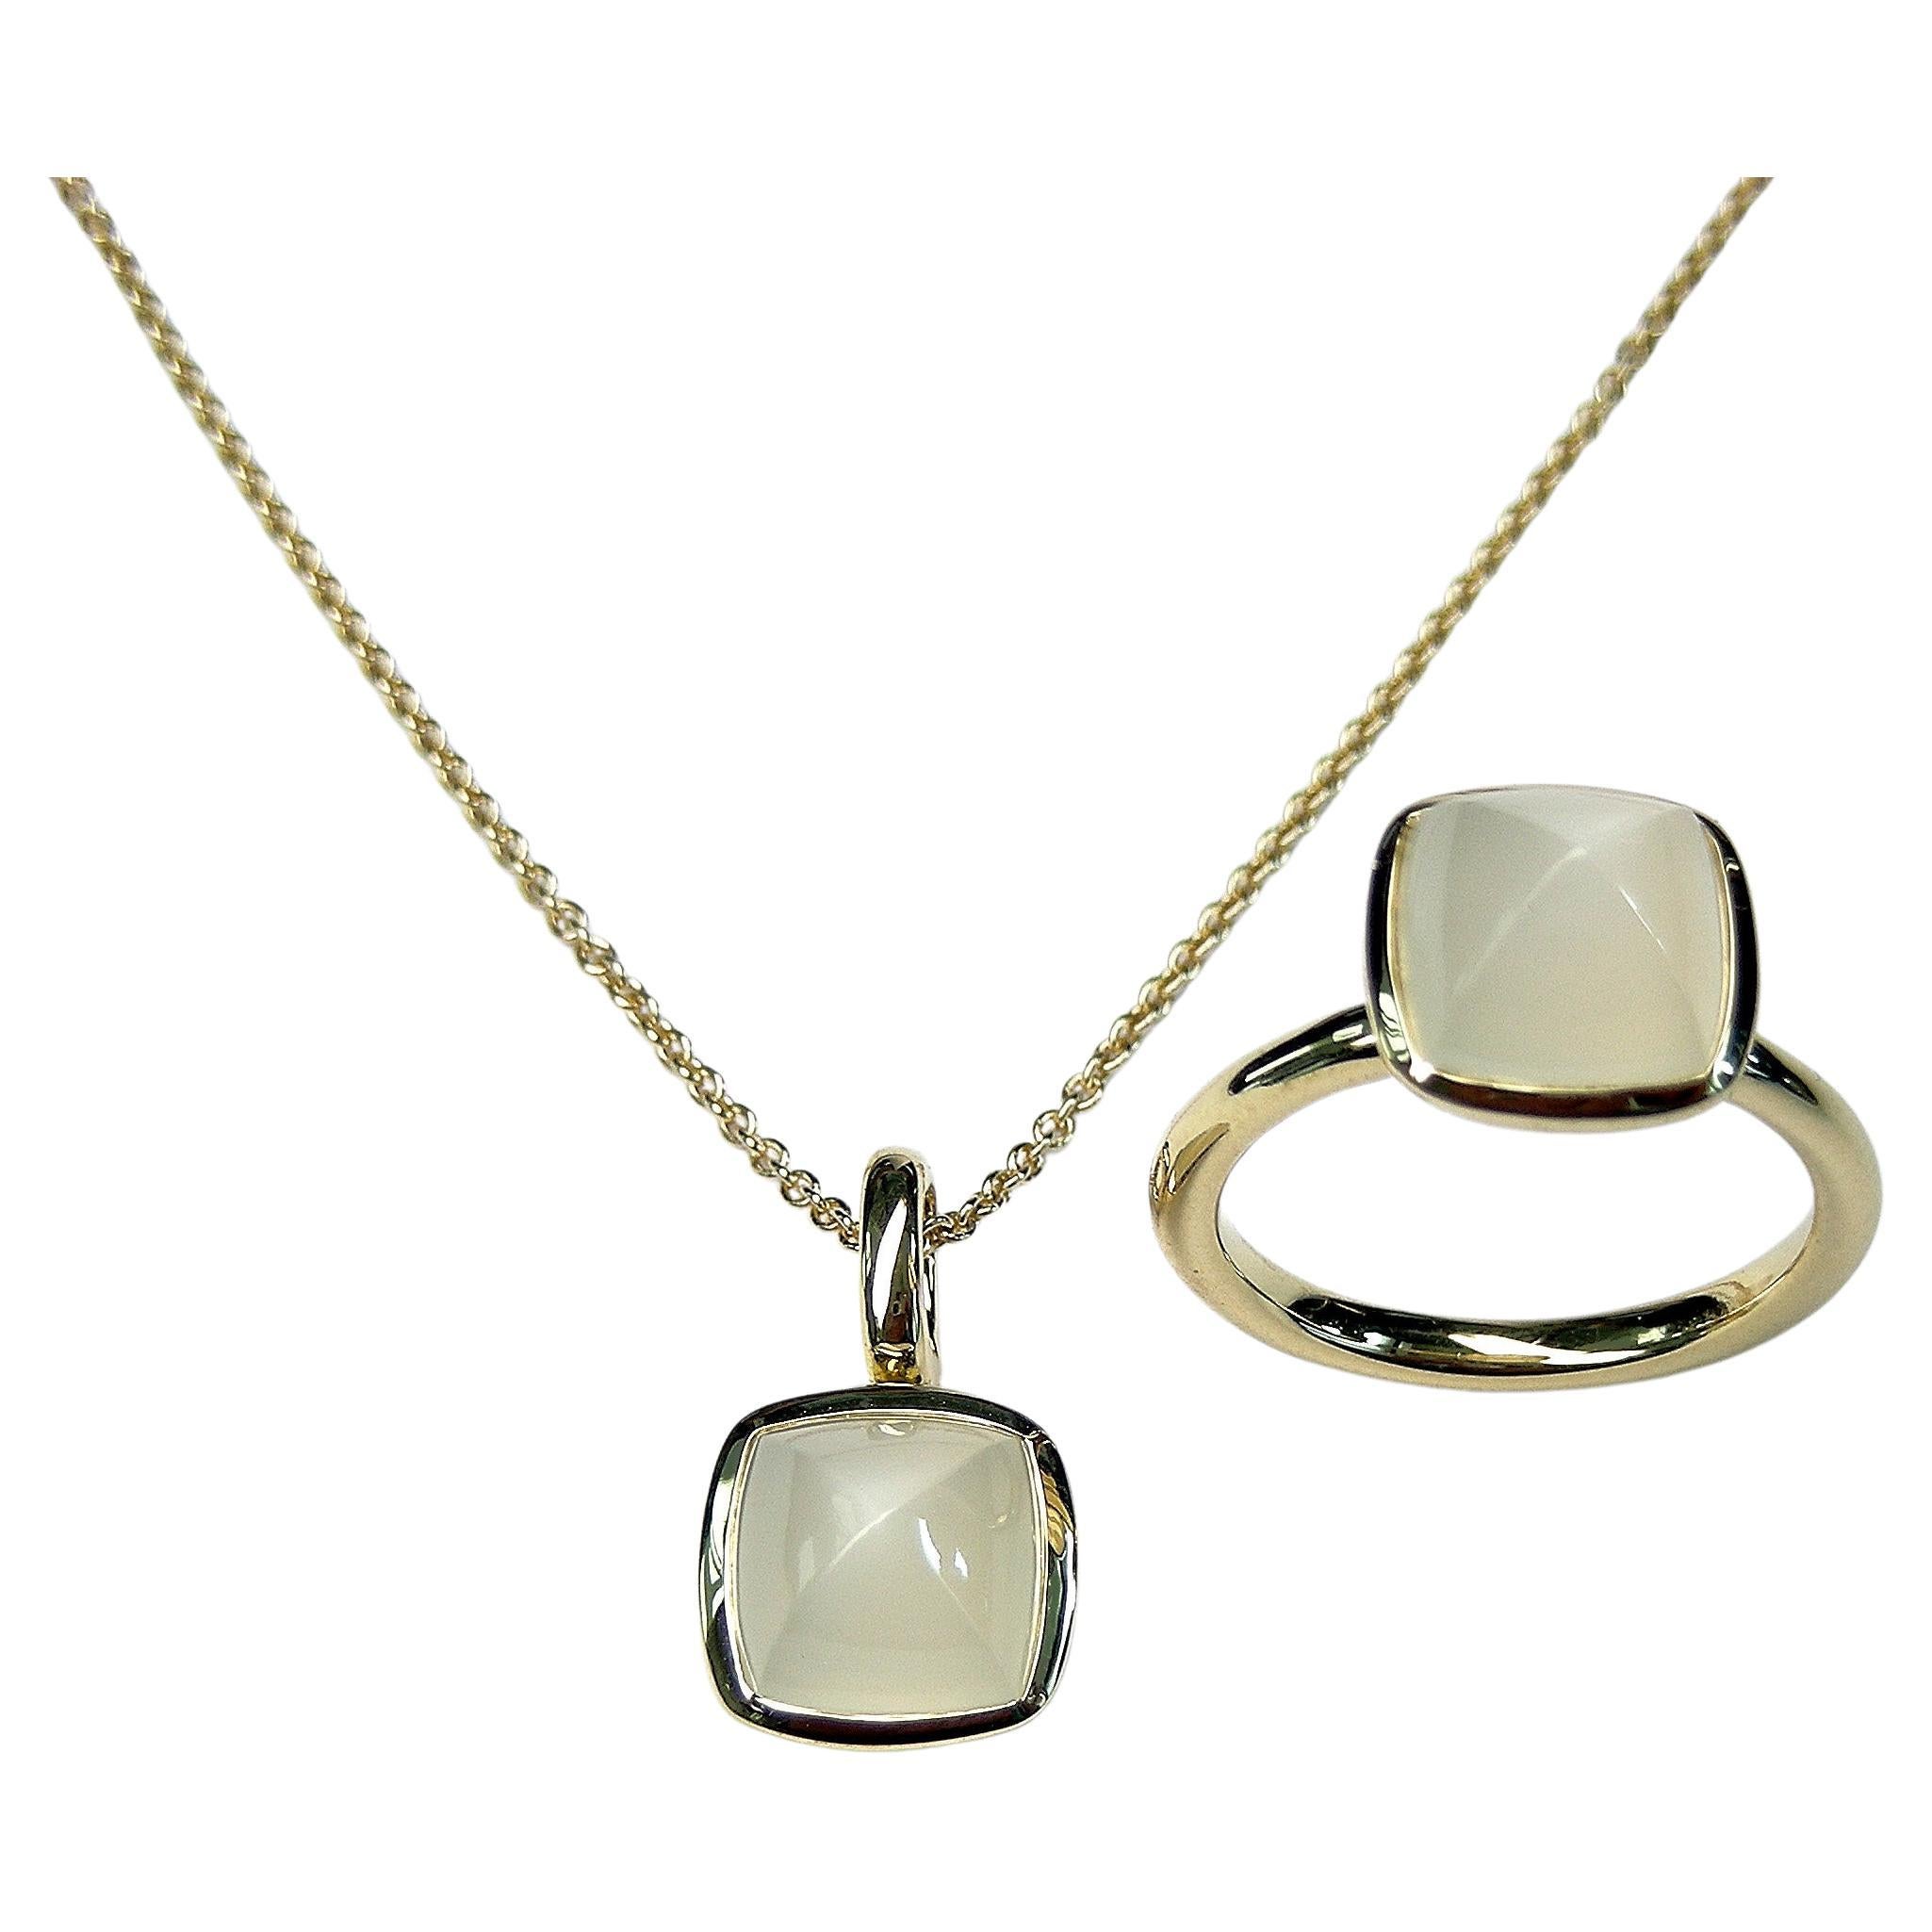 Crisscut Piramid Cabouchon White Moonstone Ring in 18k Yellow Gold Pendant Necklace For Sale